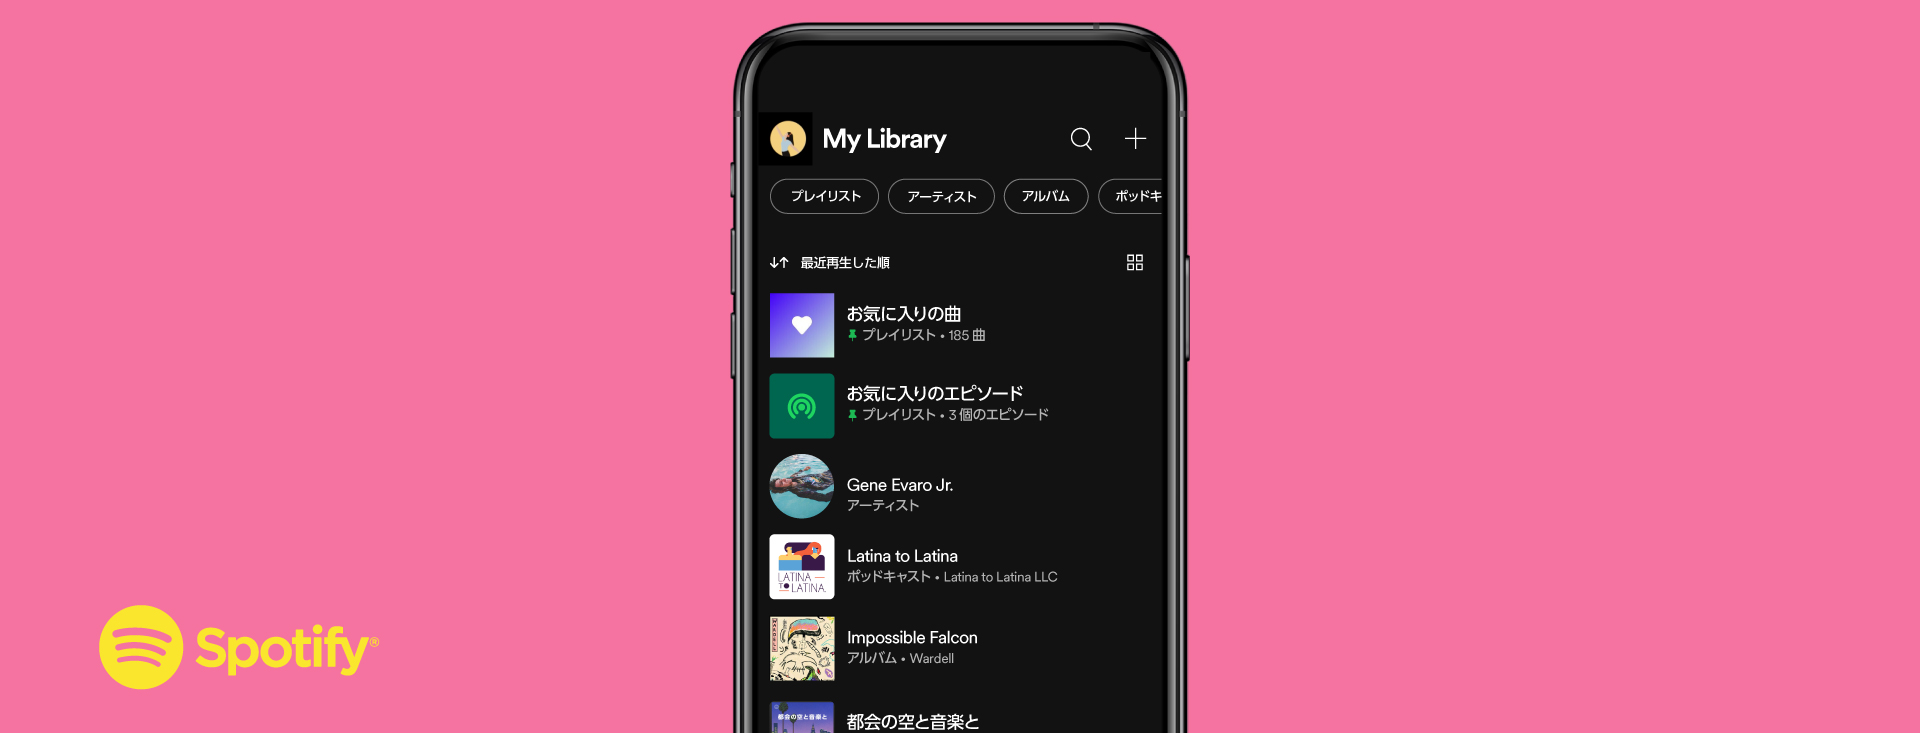 Spotify 広報サイト For the Record My Library アップデート カバー画像